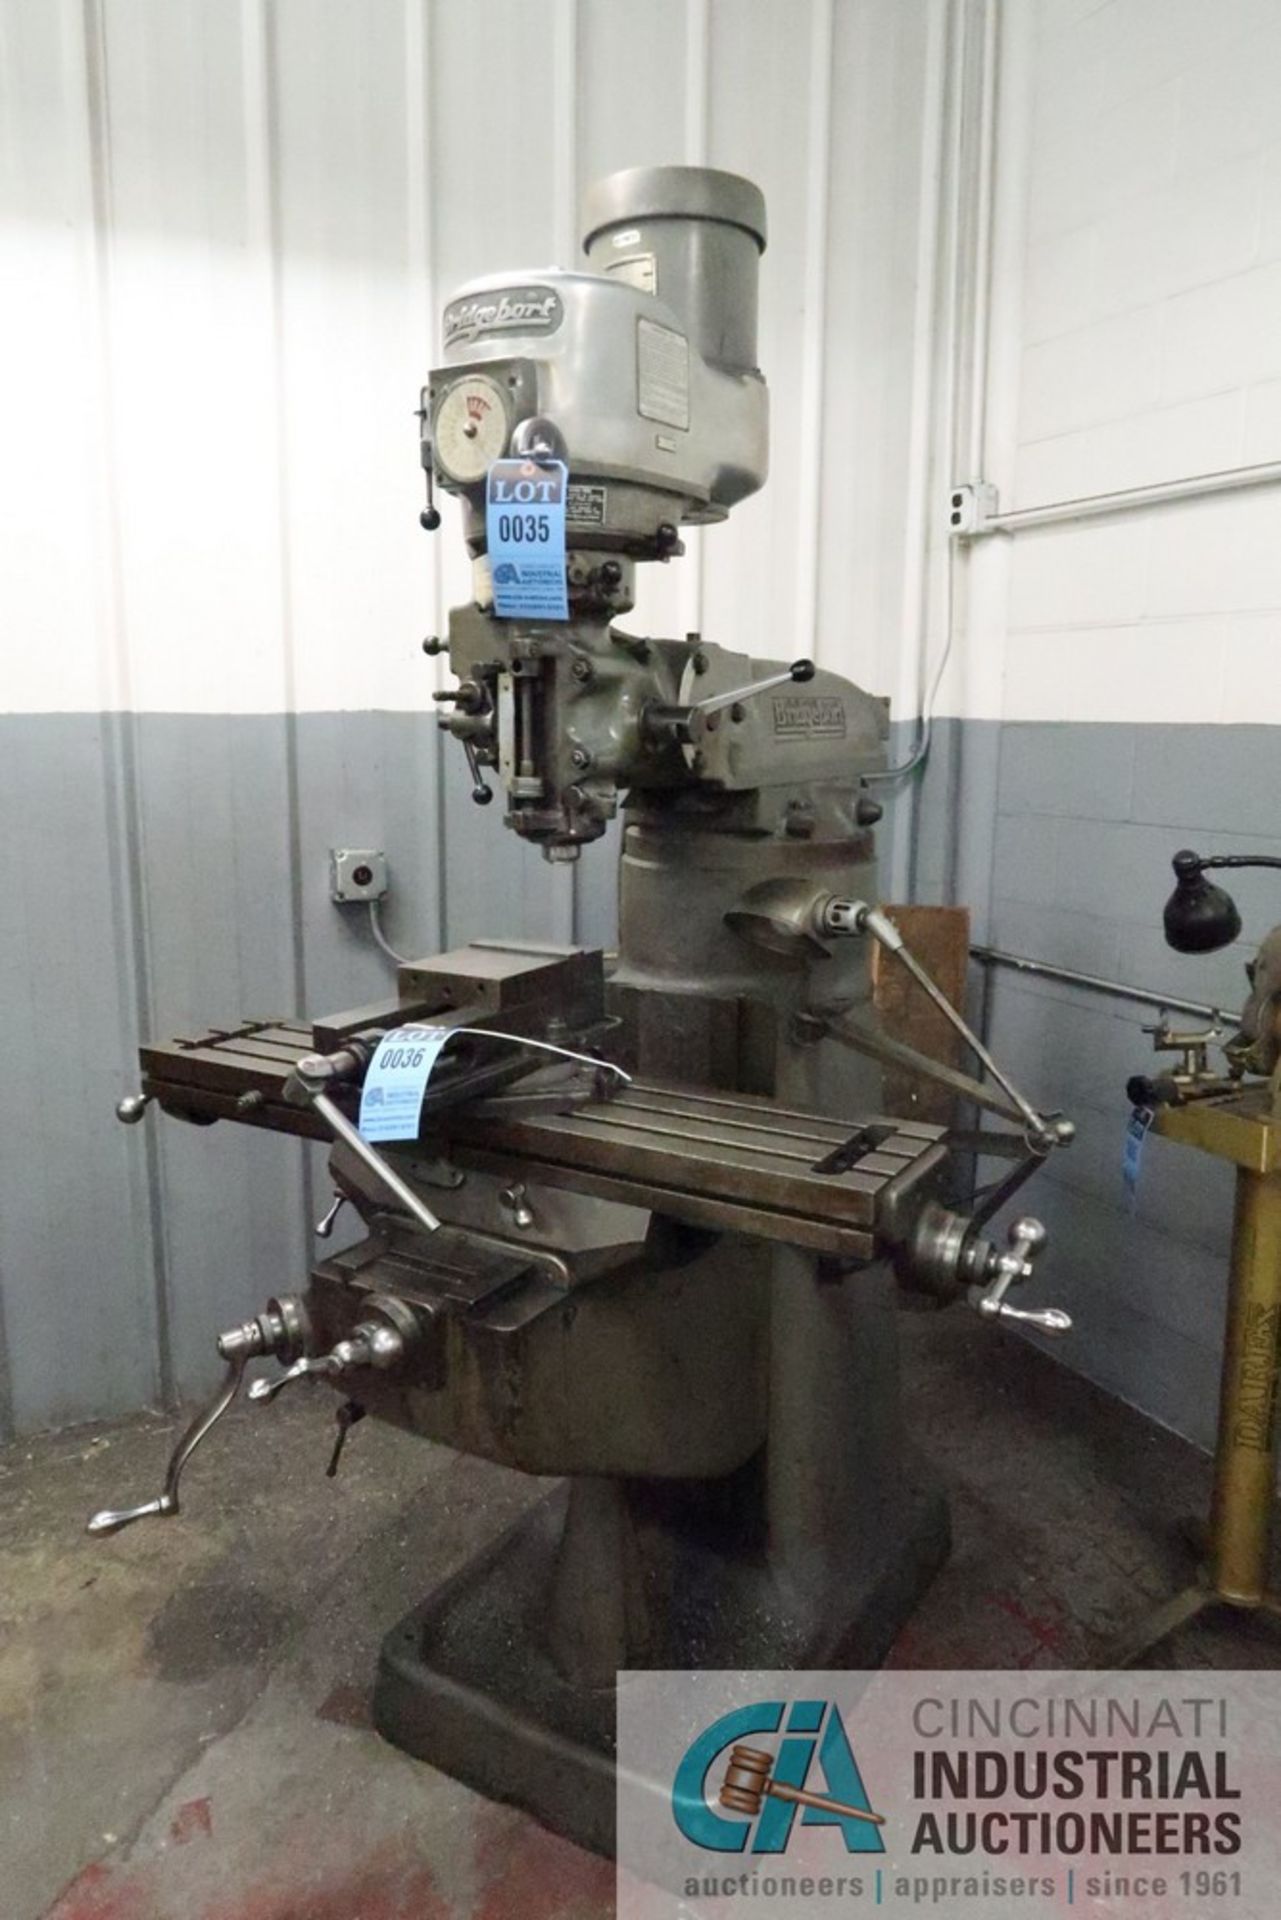 1-1/2 HP BRIDGEPORT VERTICAL MILL; S/N 129764, 9" X 42" TABLE, SPINDLE SPEED 60-4,200 RPM